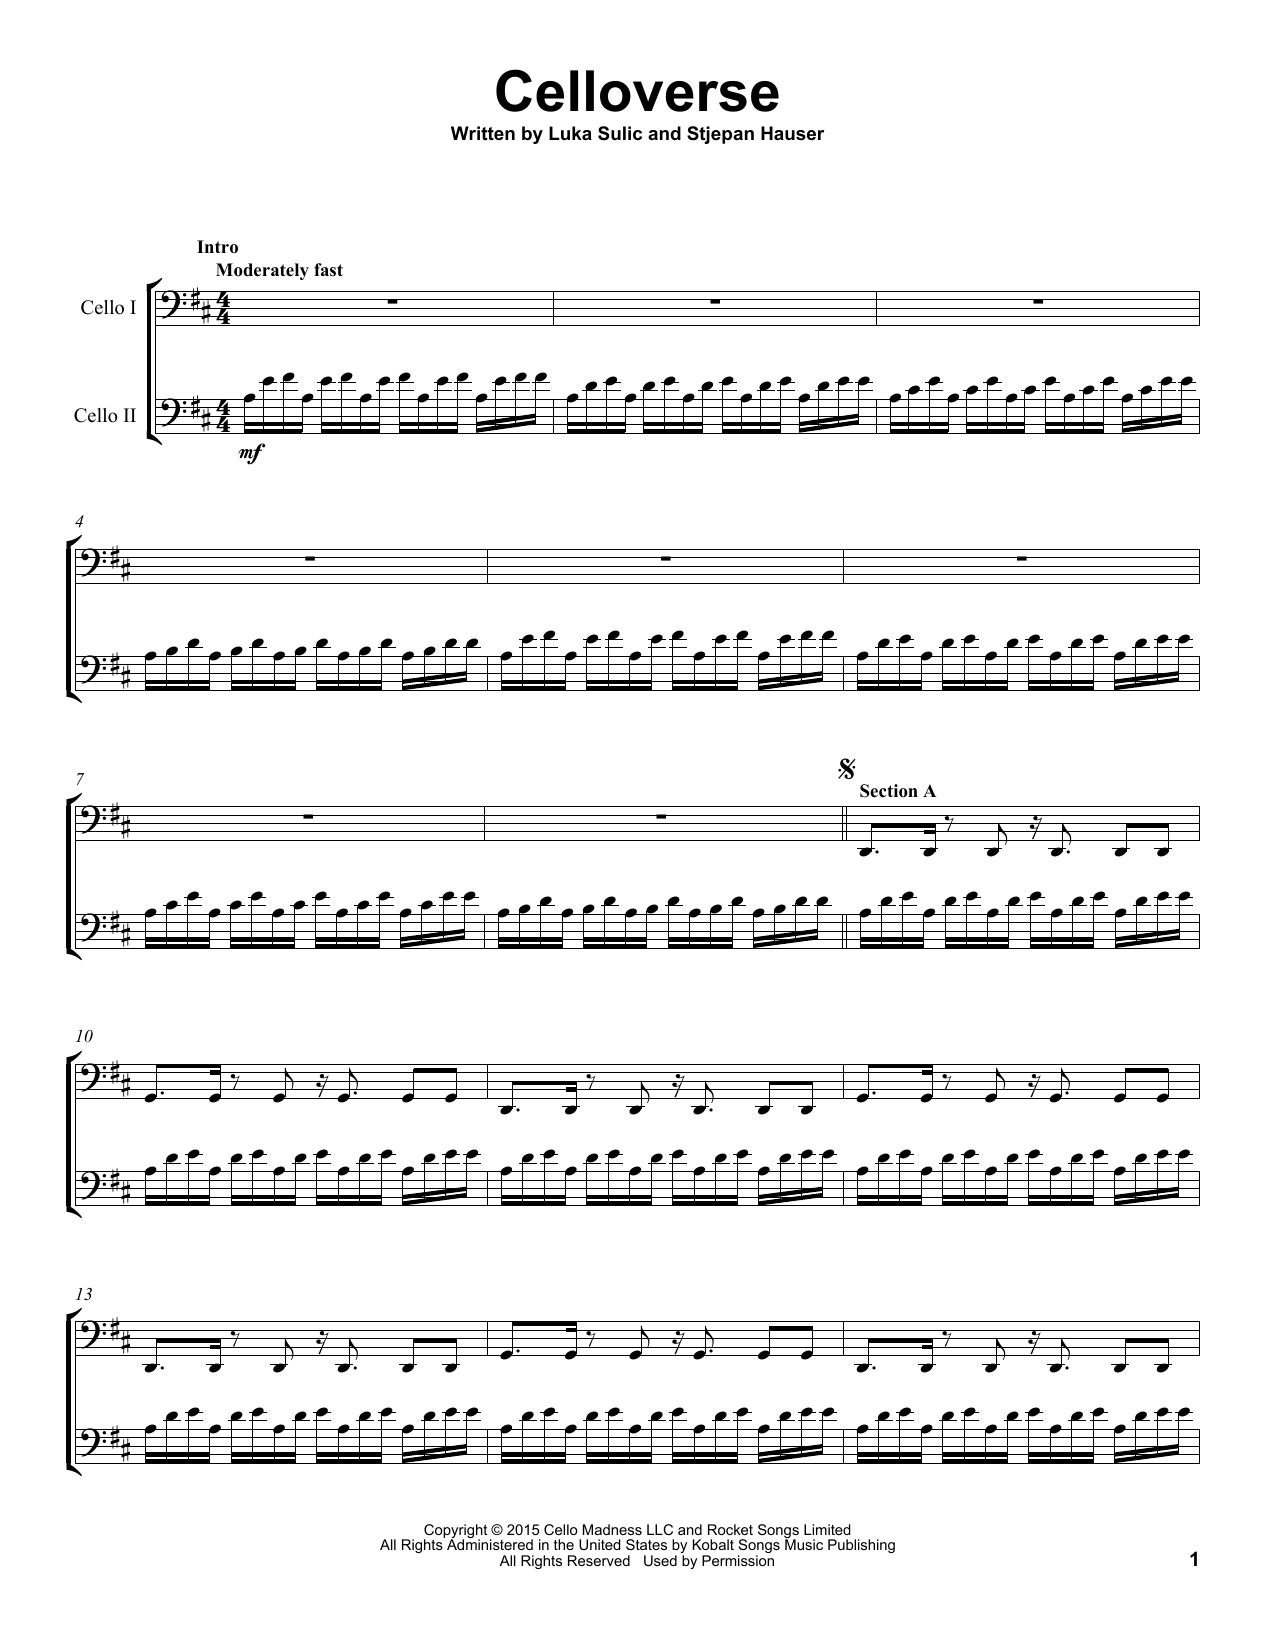 2Cellos Celloverse sheet music notes and chords. Download Printable PDF.